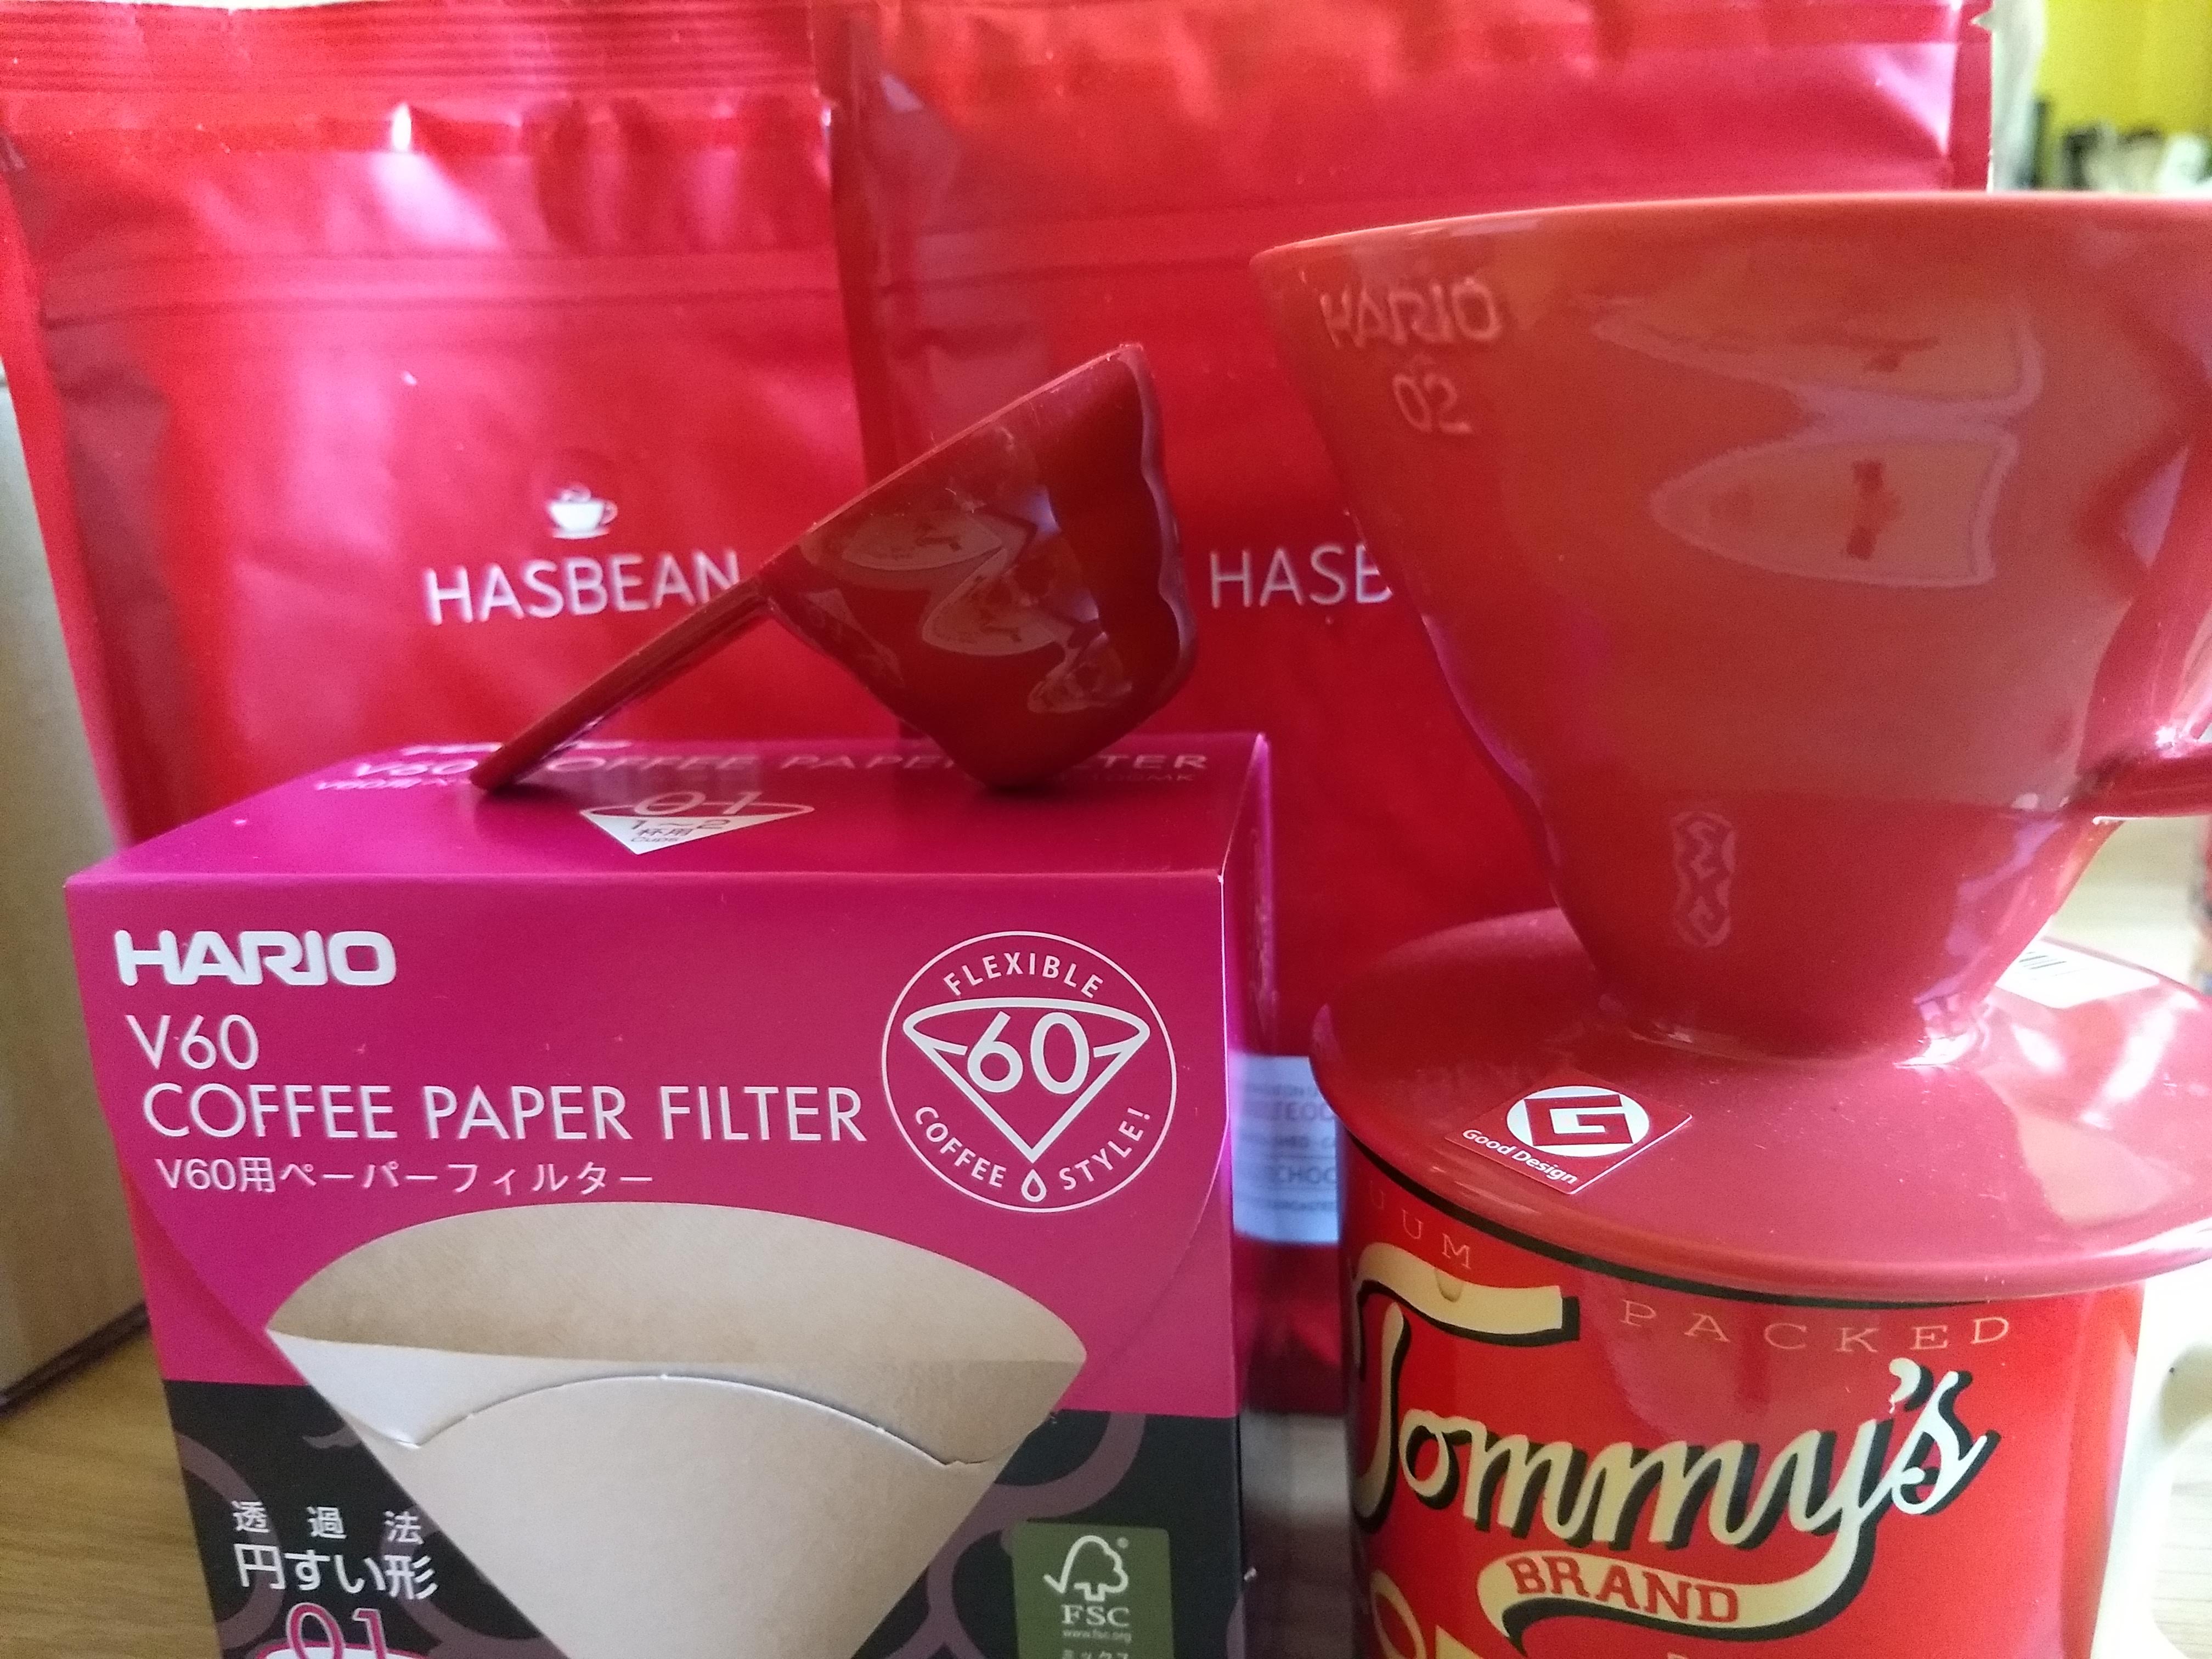 A Hario V60 coffee dripper next to some bags of coffe